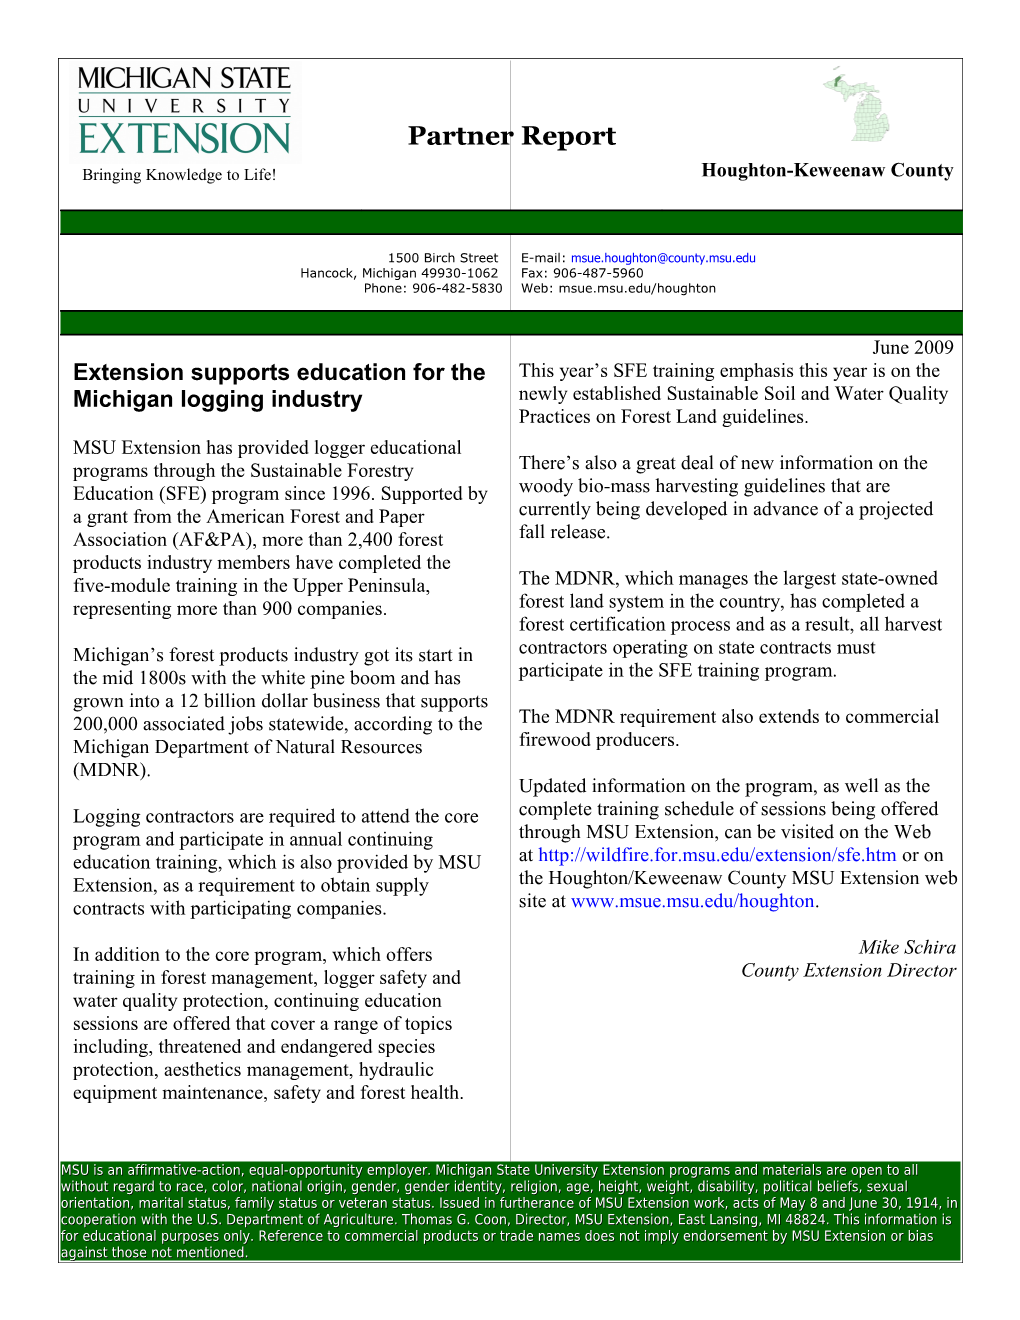 Extension Supports Education for the Michigan Logging Industry